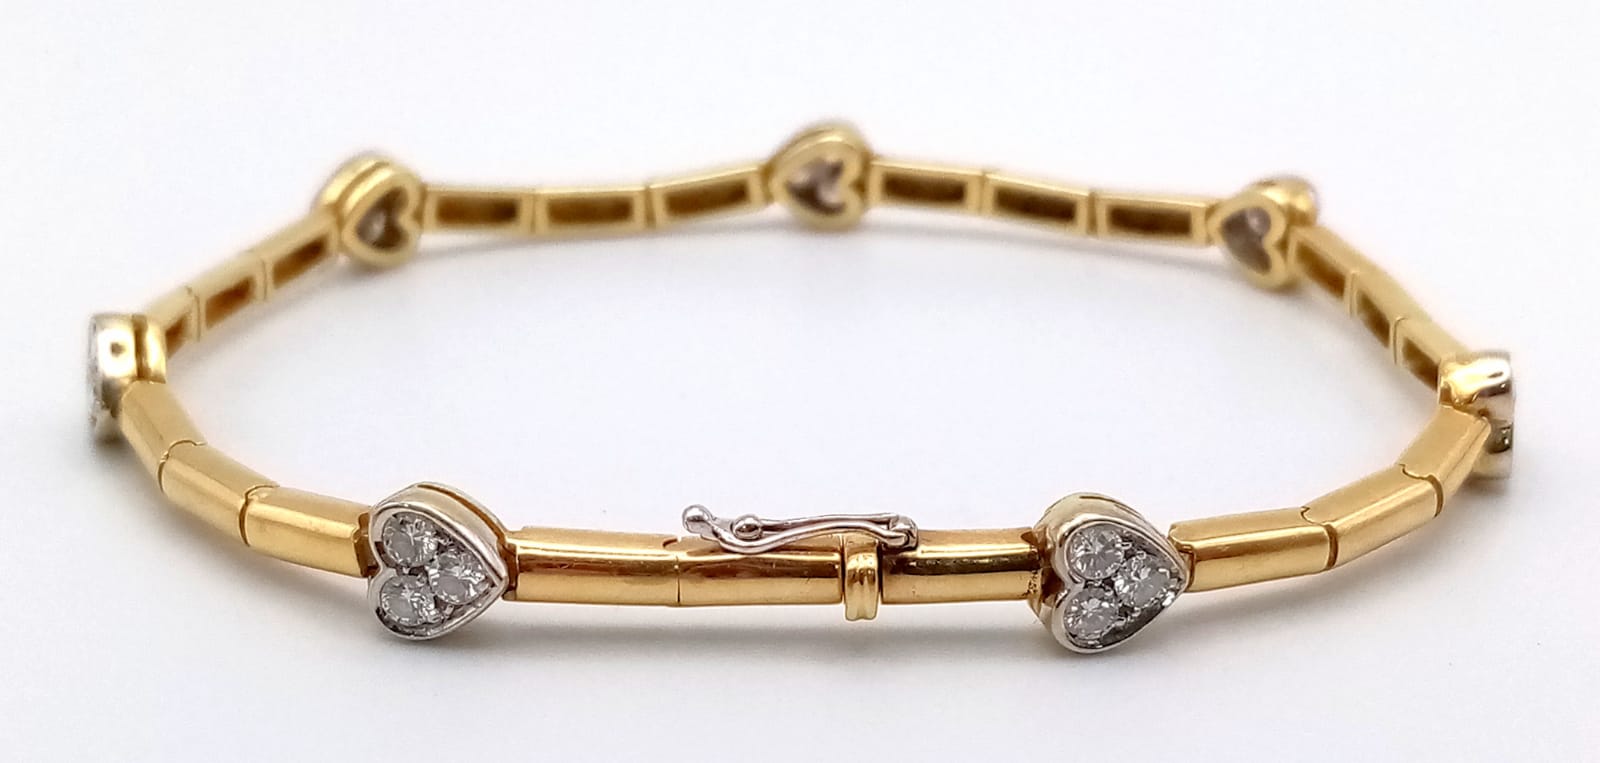 A Gorgeous 18K Gold and Heart-Diamond Necklace and Bracelet Set. The necklace is decorated with - Image 20 of 21